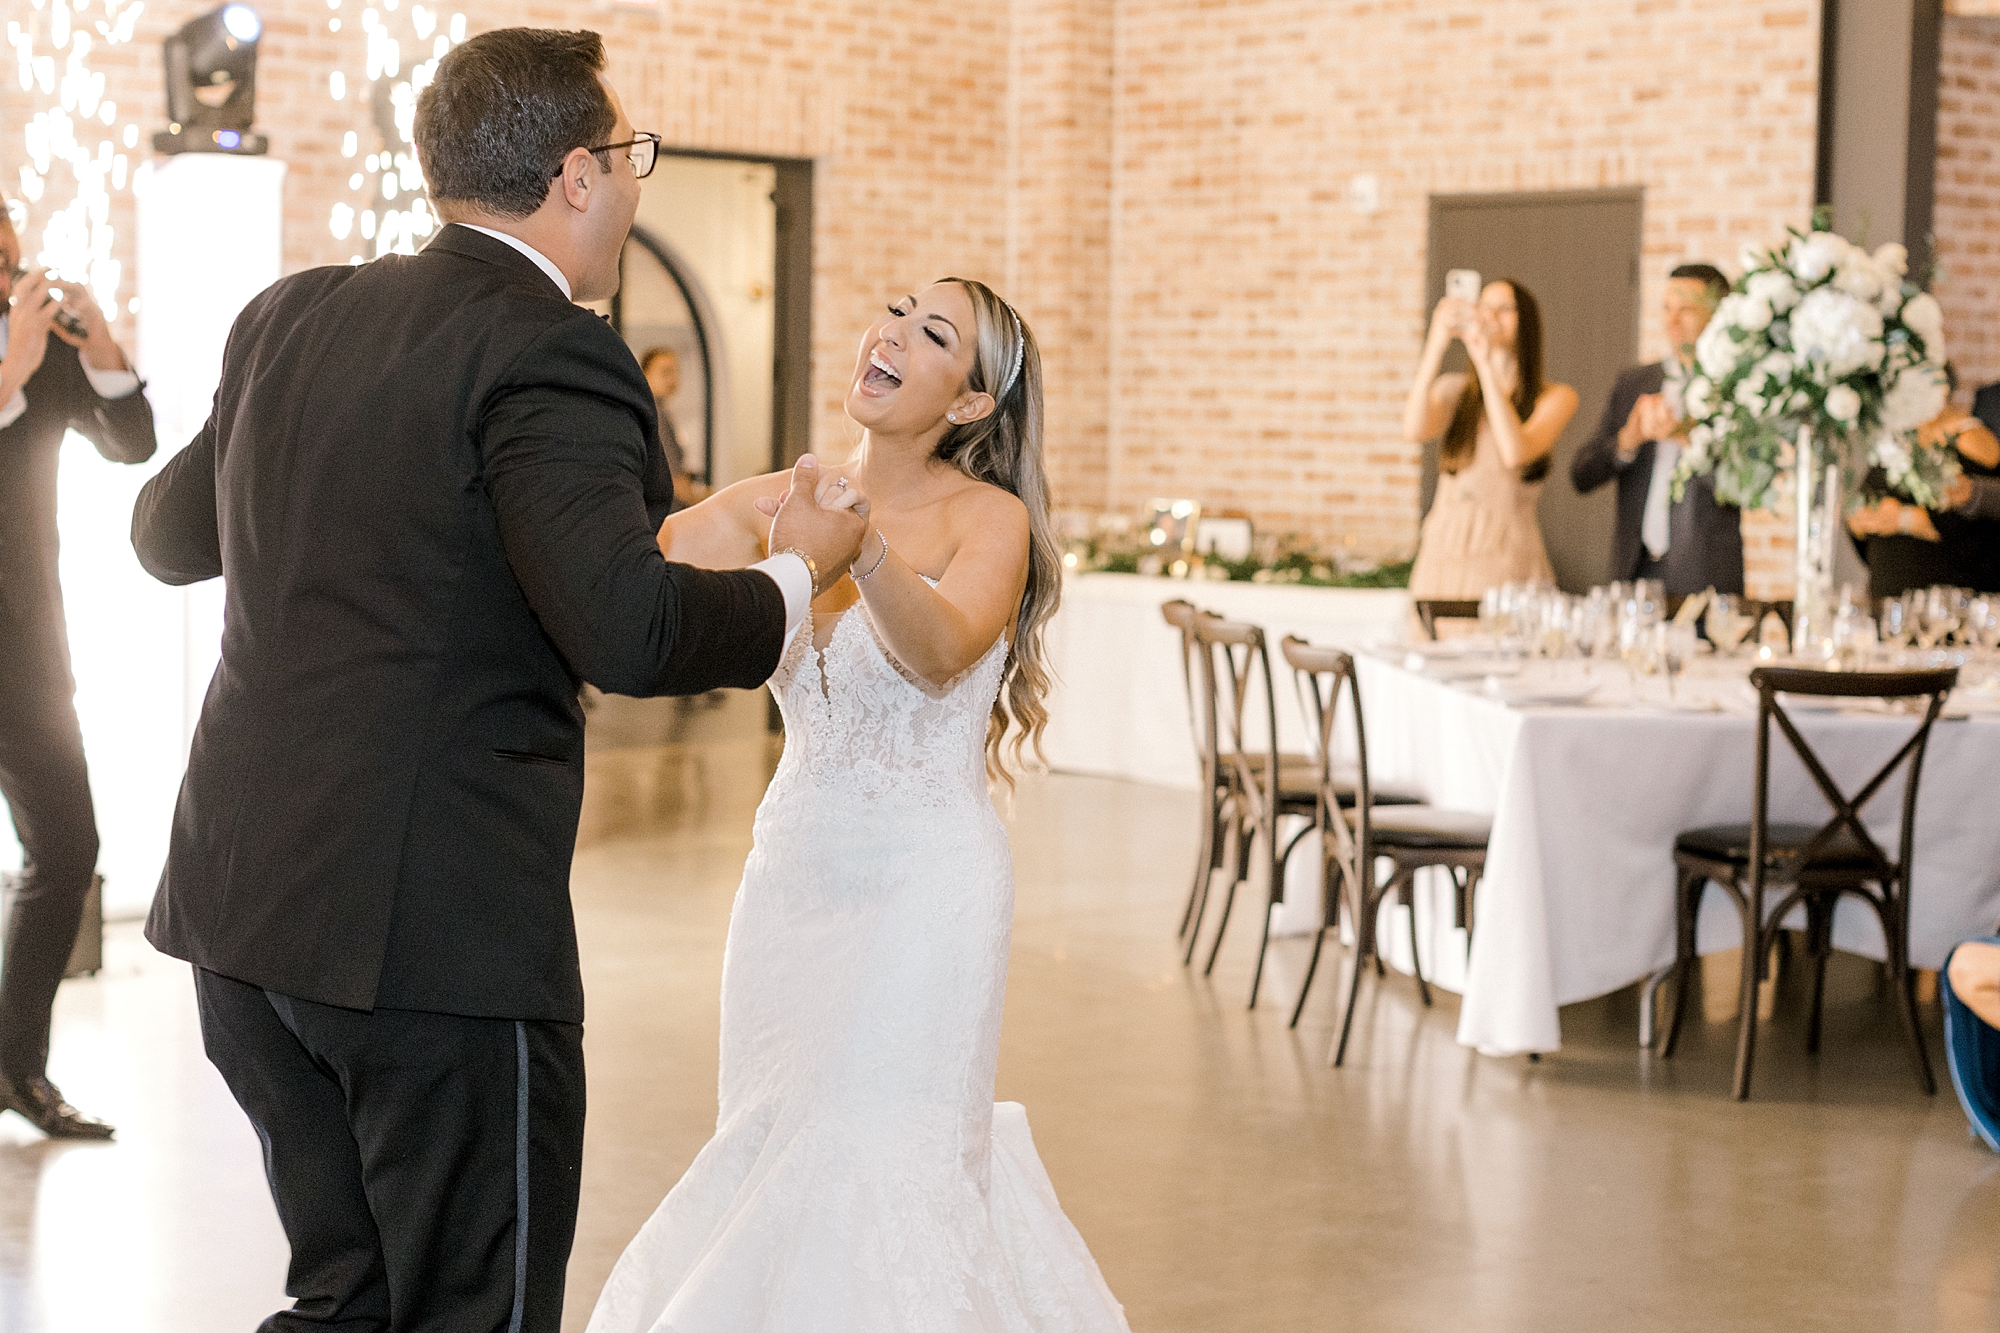 bride laughs while groom twirls her during reception dances